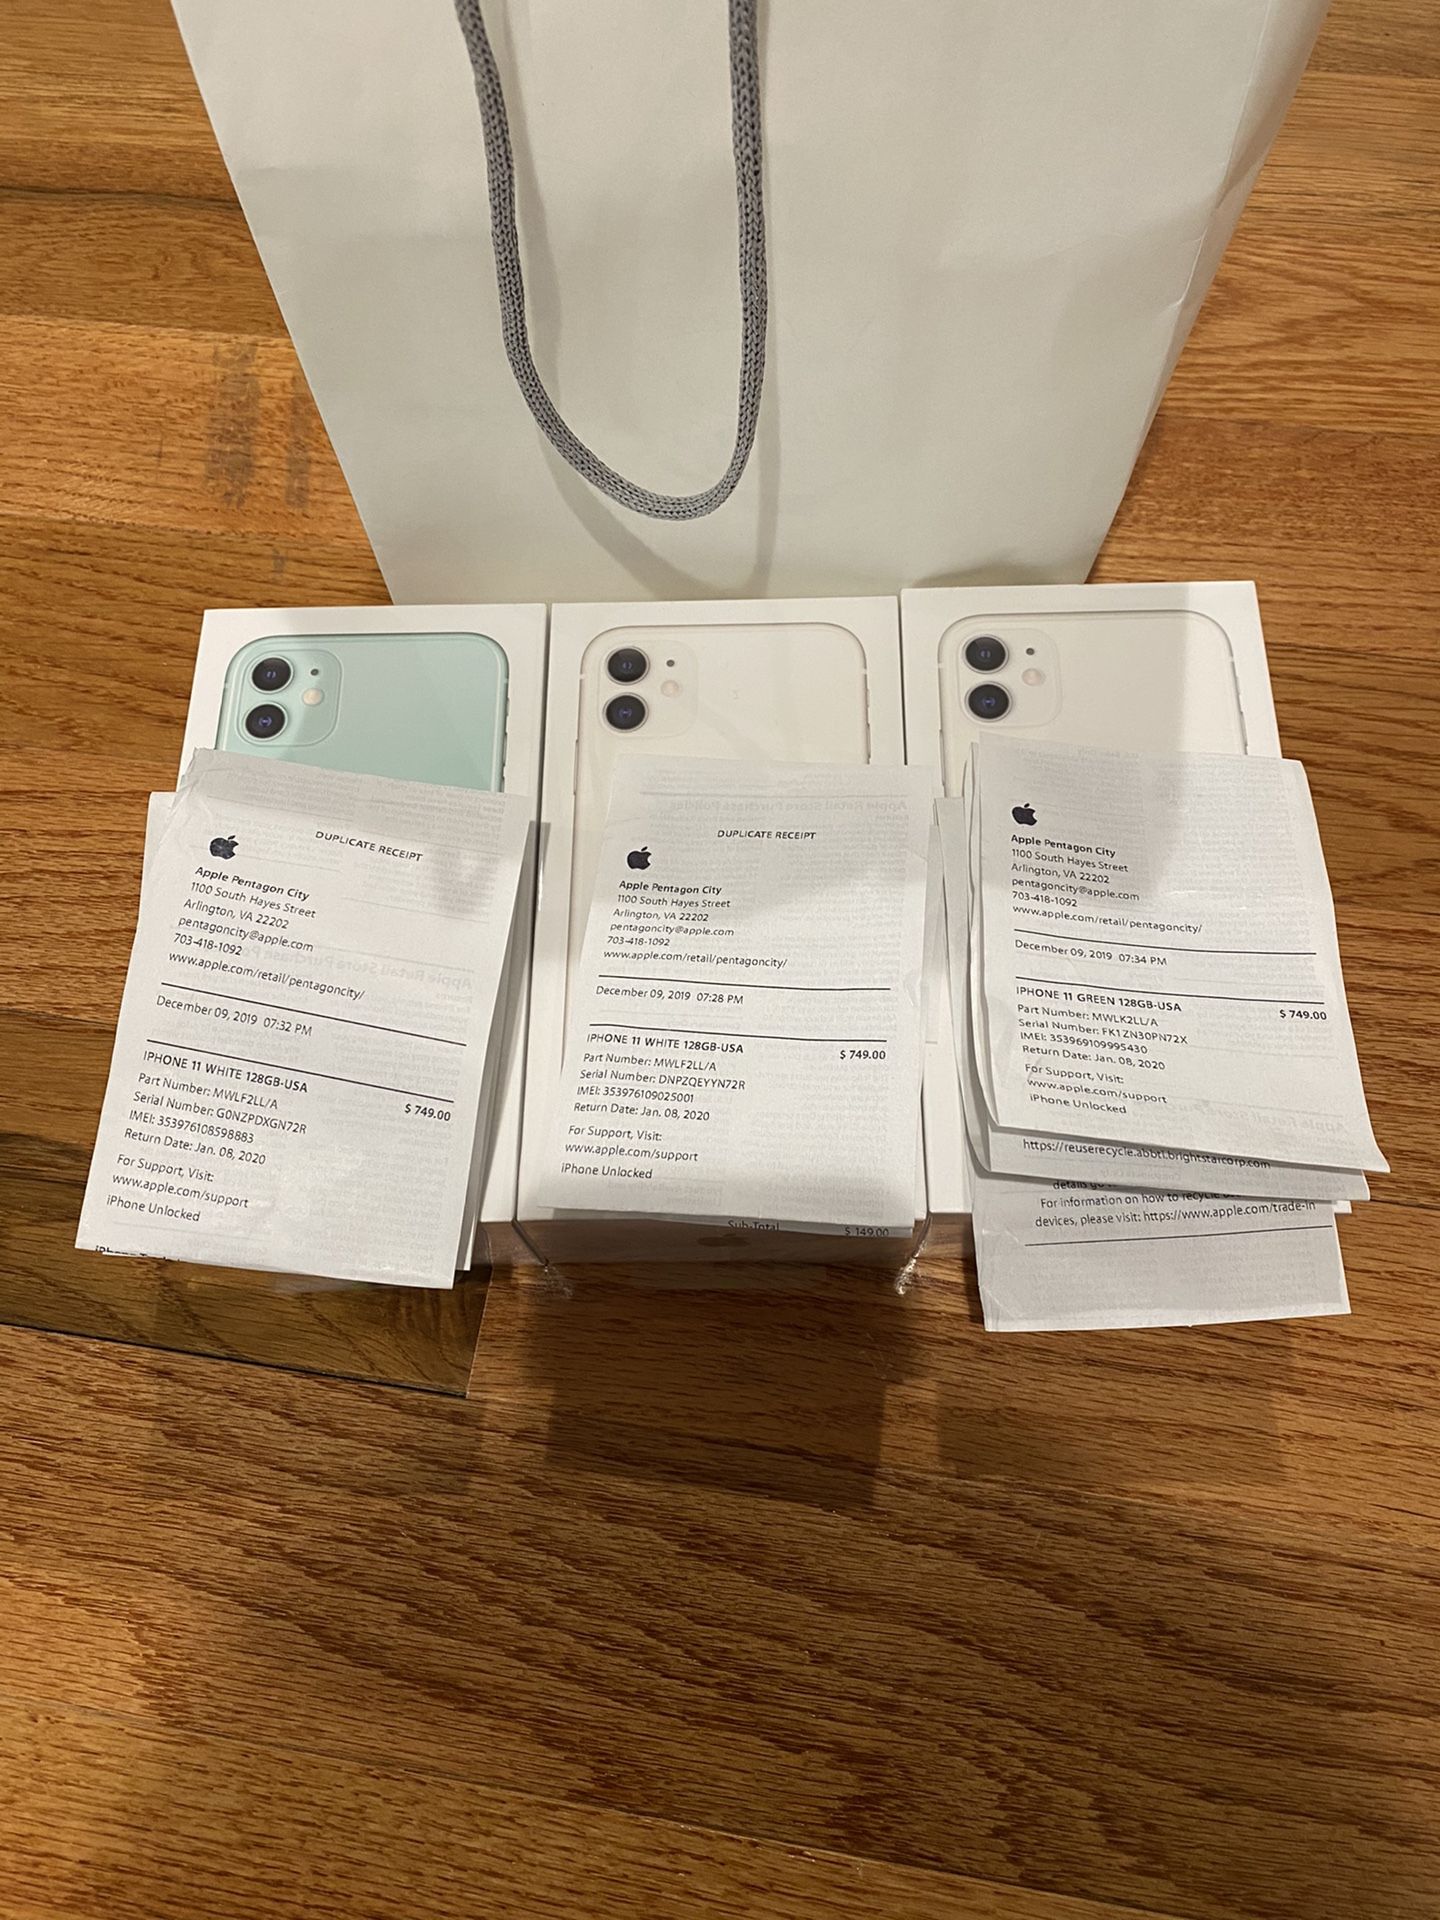 Iphone 11 unlock from Apple store 128gb and the receipt